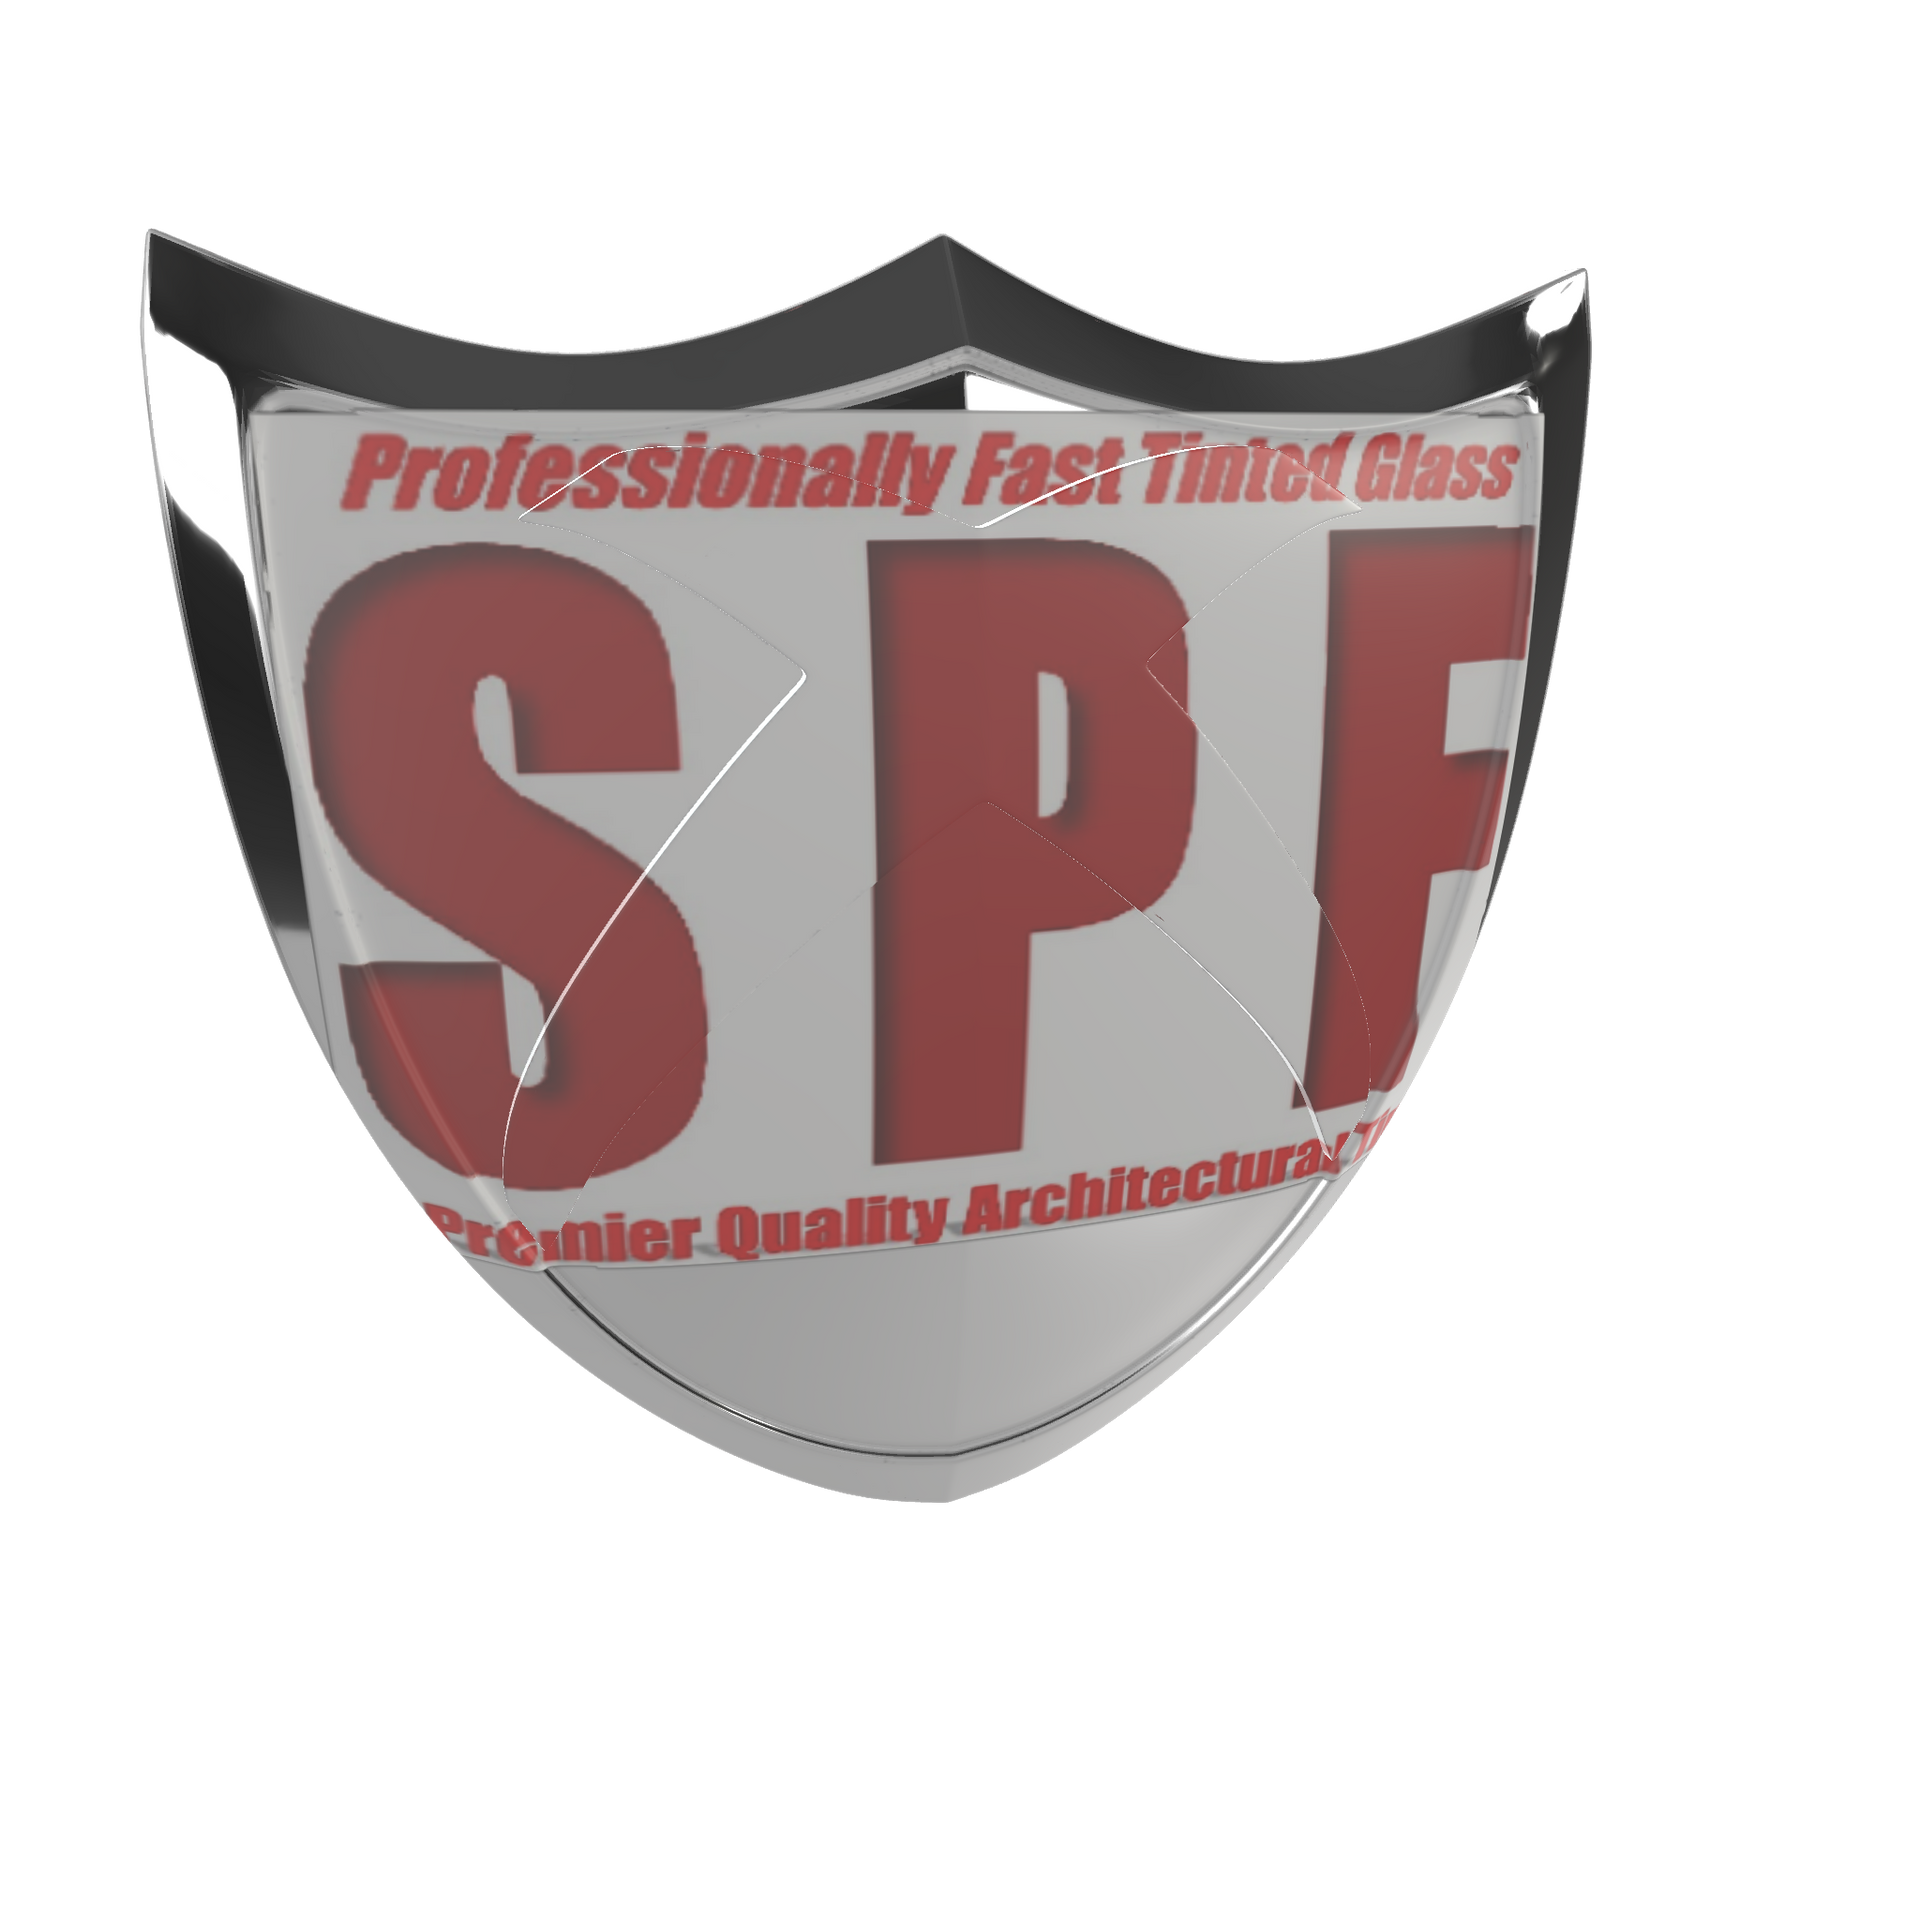 SPF Window Tinting Exclusive Products with installation Services Seal of authenticity - Alabama SPF Premier Quality Architectural Tint